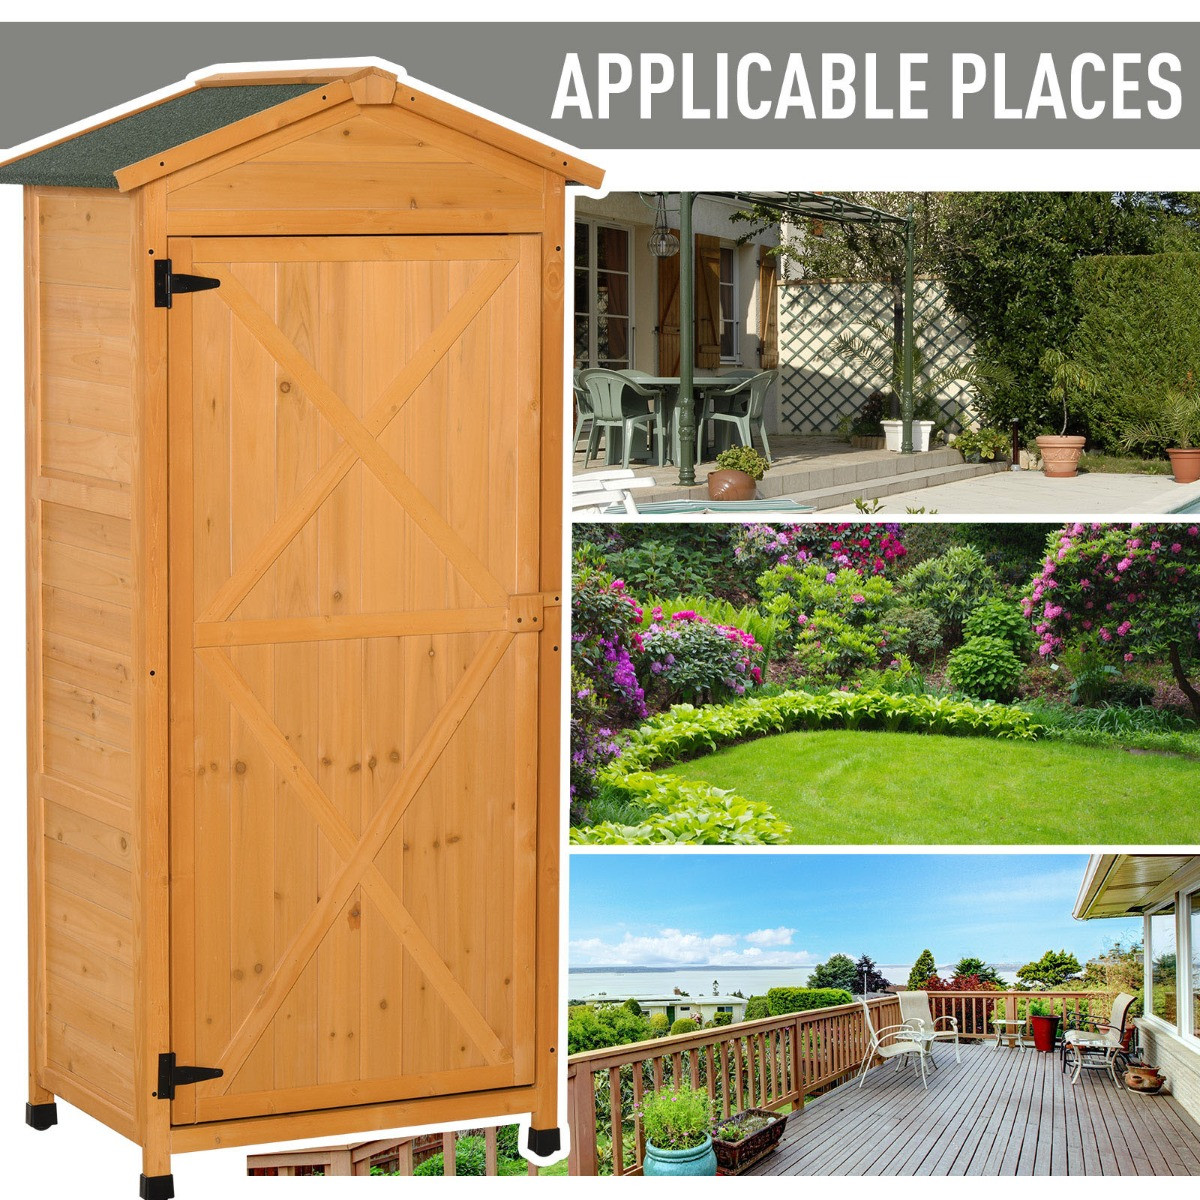 Outsunny Wooden Garden Storage Shed Cabinet, Natural Wood - Tall>